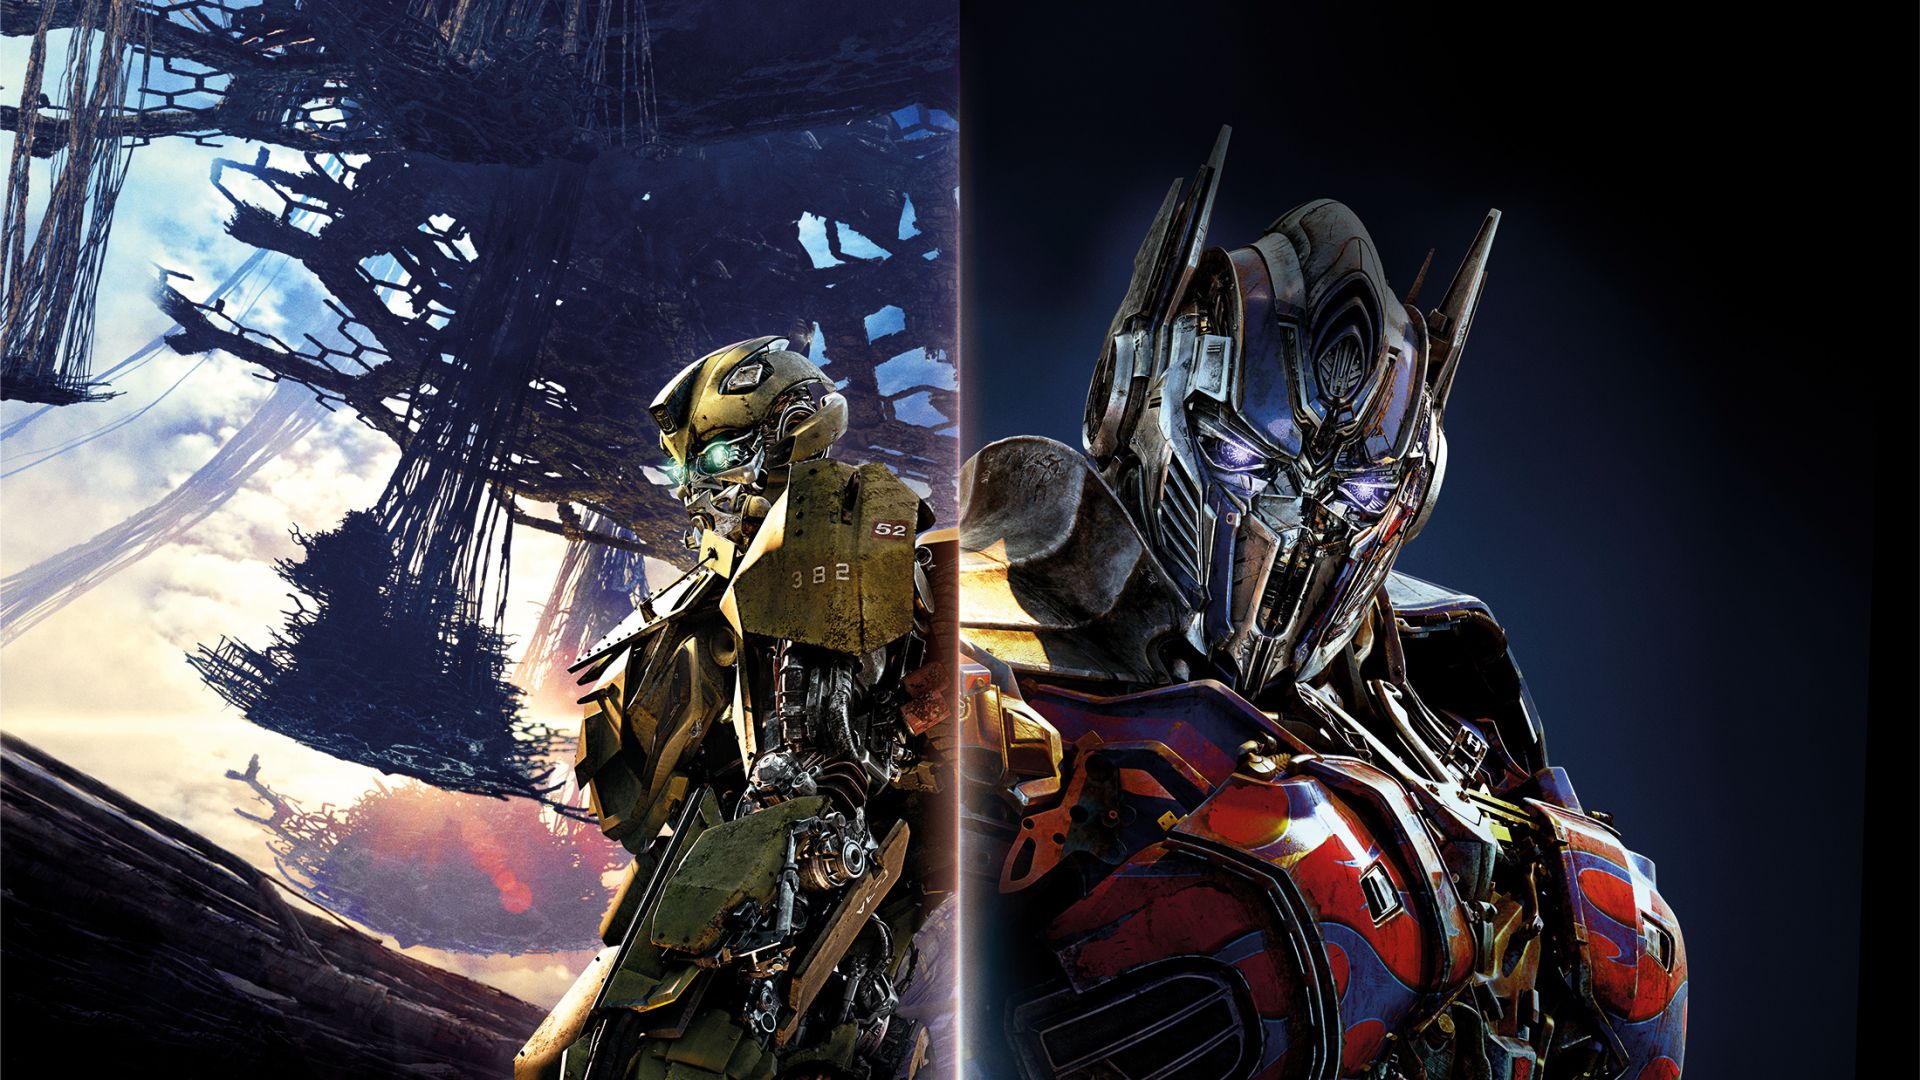 Wallpaper Bumblebee, Optimus prime, Transformers: the last knight, movie, face-off